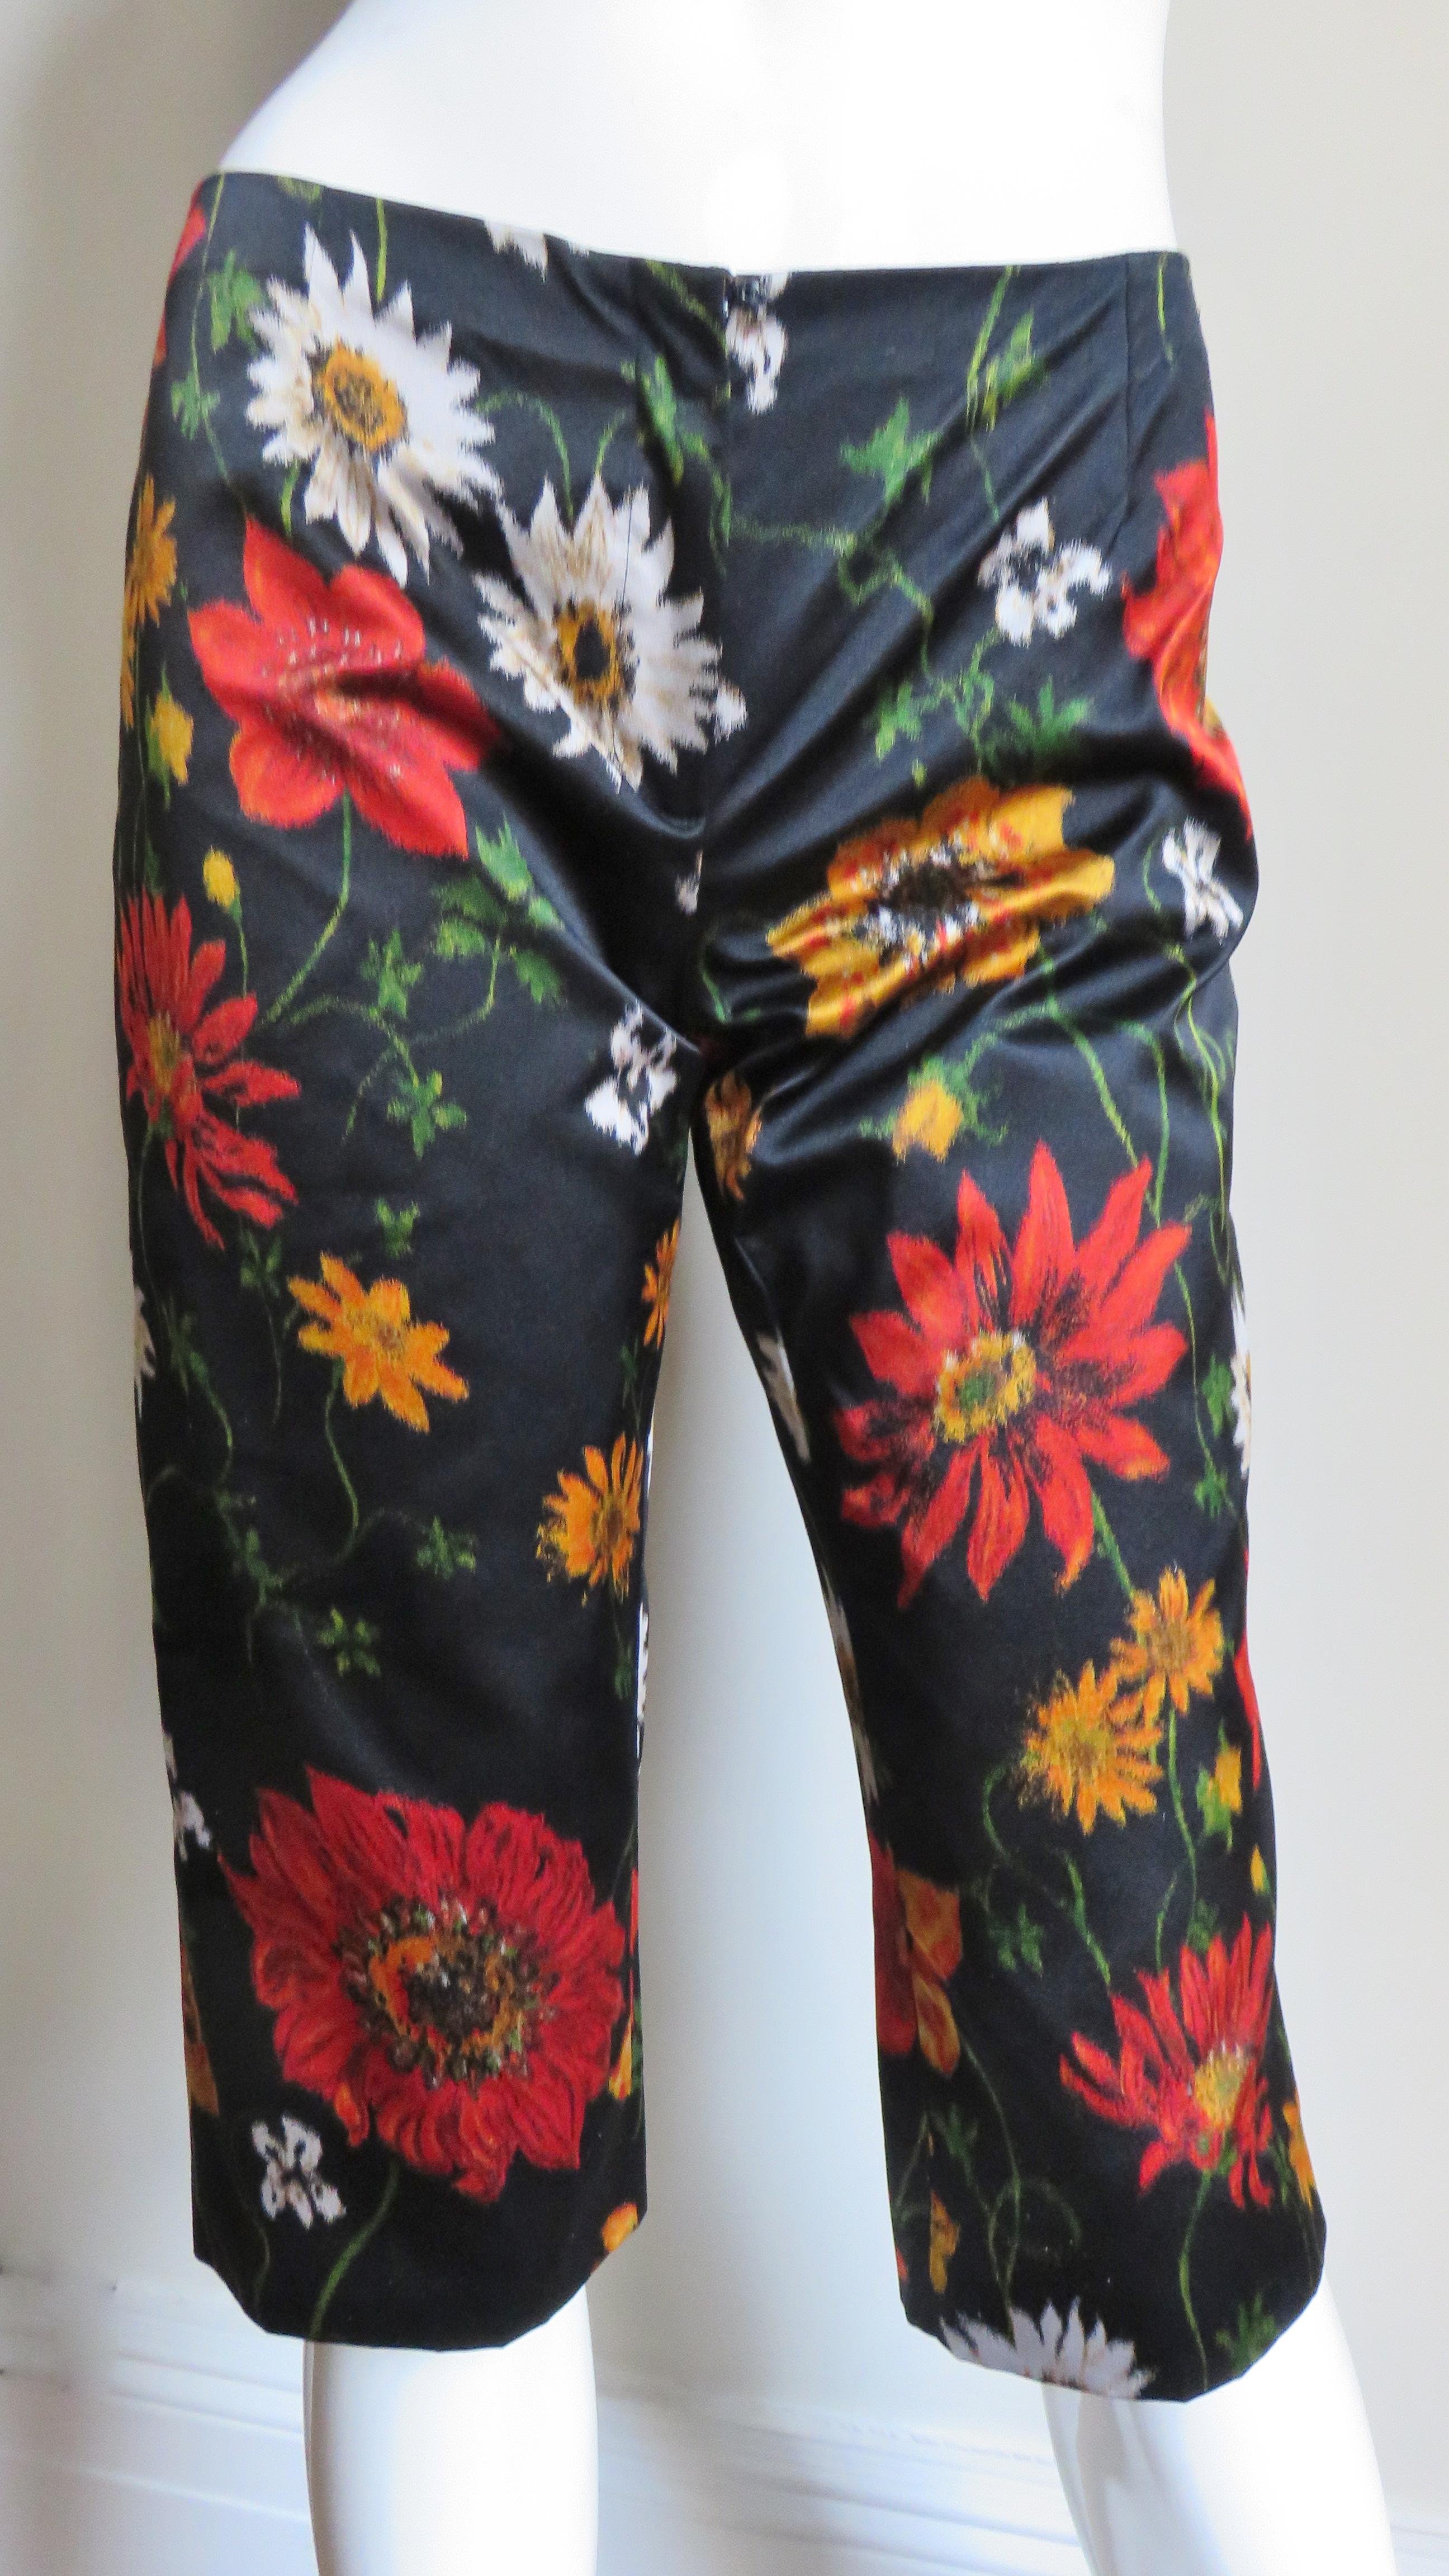 A beautiful pair of silk flowered shorts in red, gold, yellow and green on a black background from Dolce & Gabbana. They are mid rise with a fly front zipper closing, below the knee in length and lined in leopard print silk.
Fits sizes Extra Small,